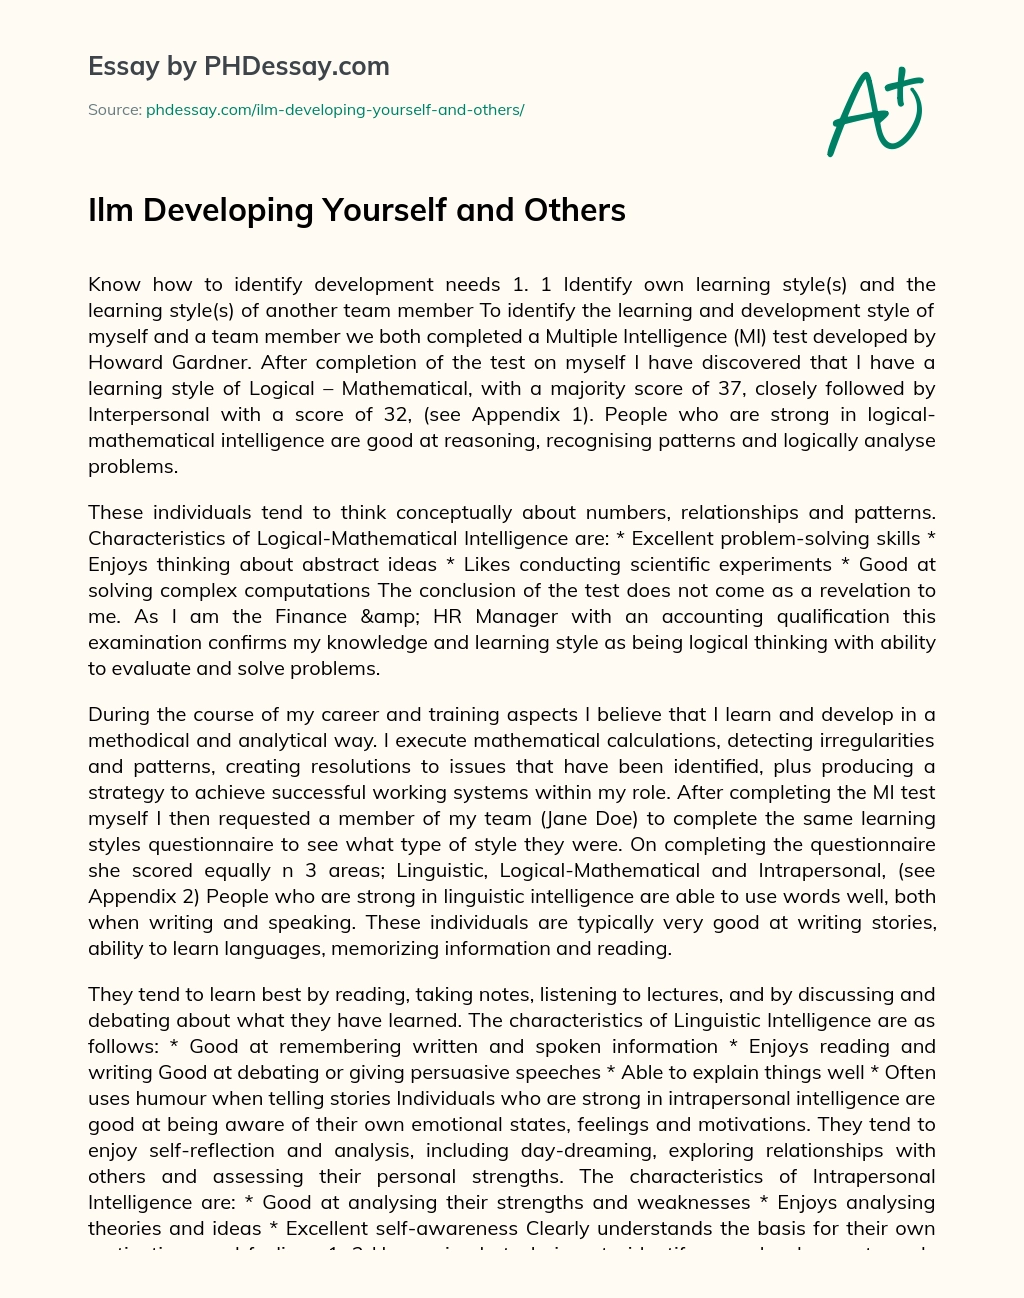 Ilm Developing Yourself and Others essay